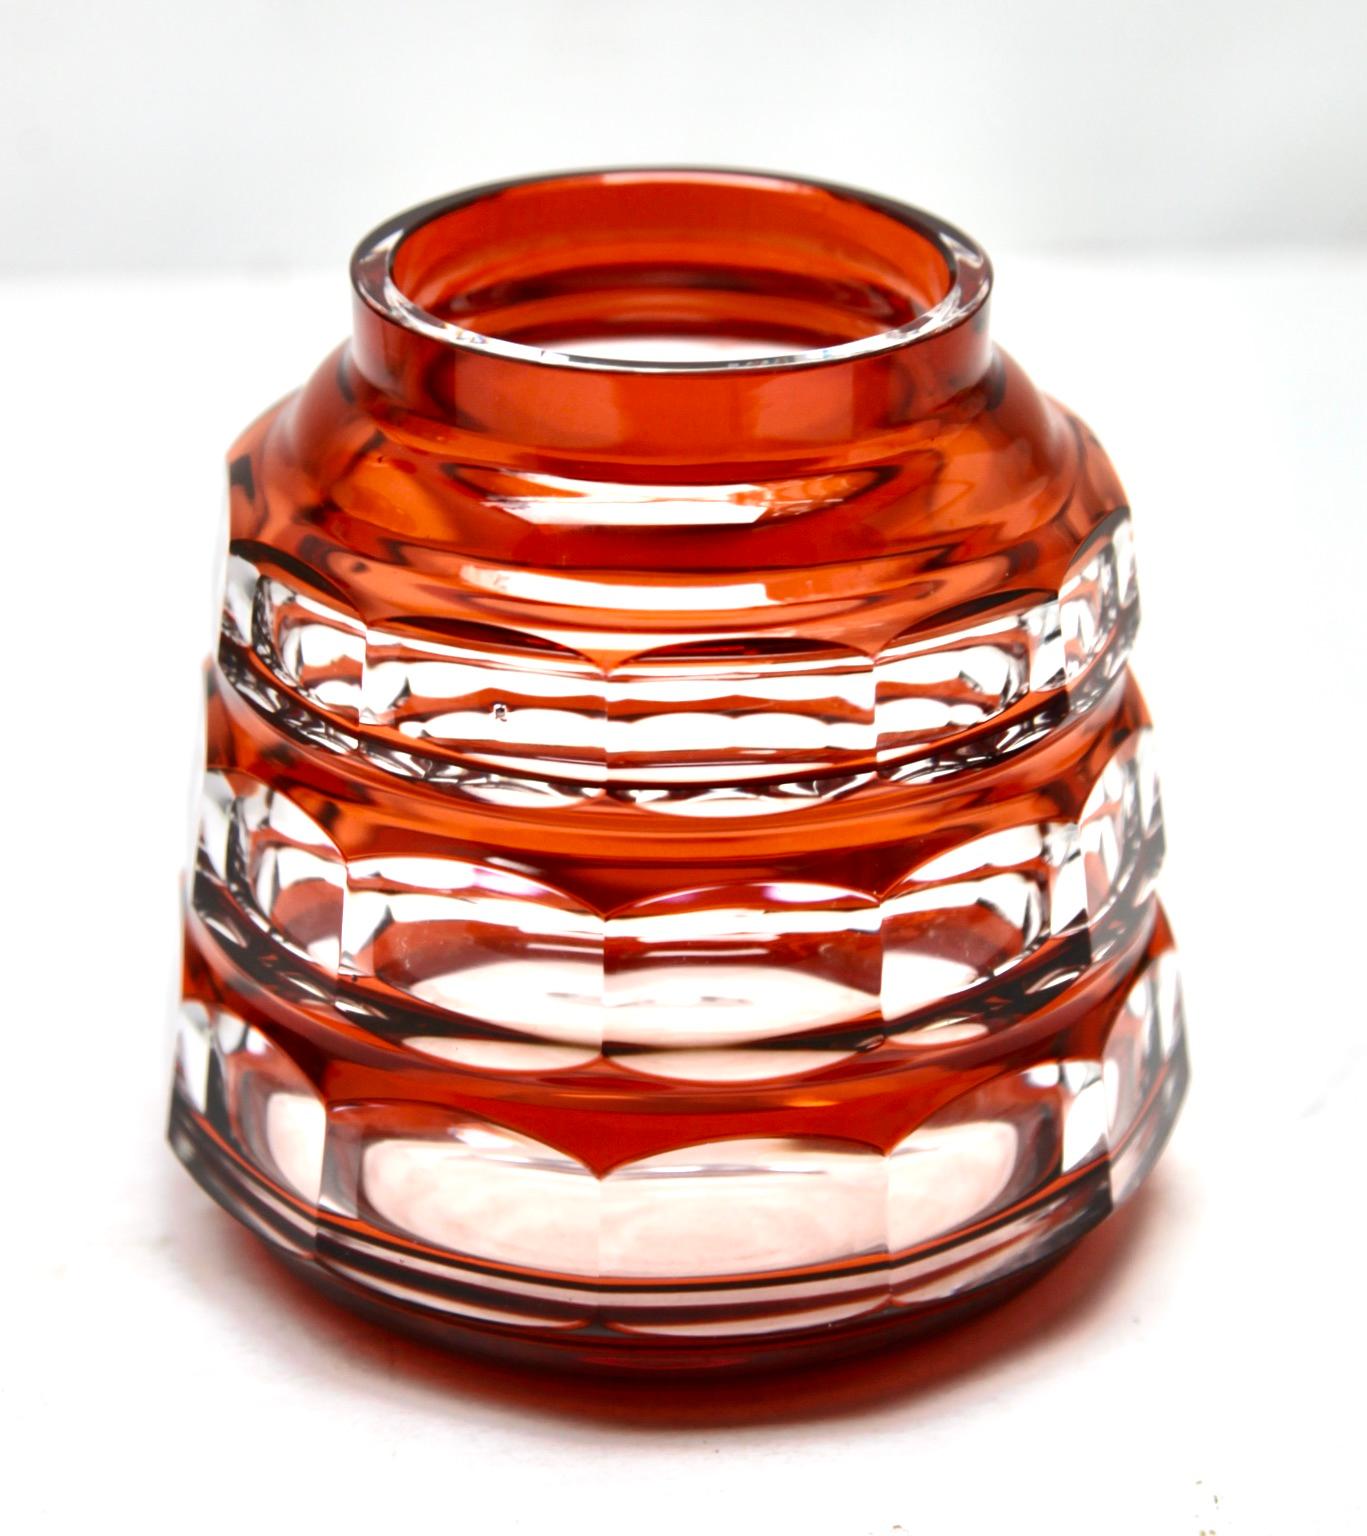 Faceted Val Saint Lambert Art Deco Crystal Vase Cut-to-clear, 1950s For Sale